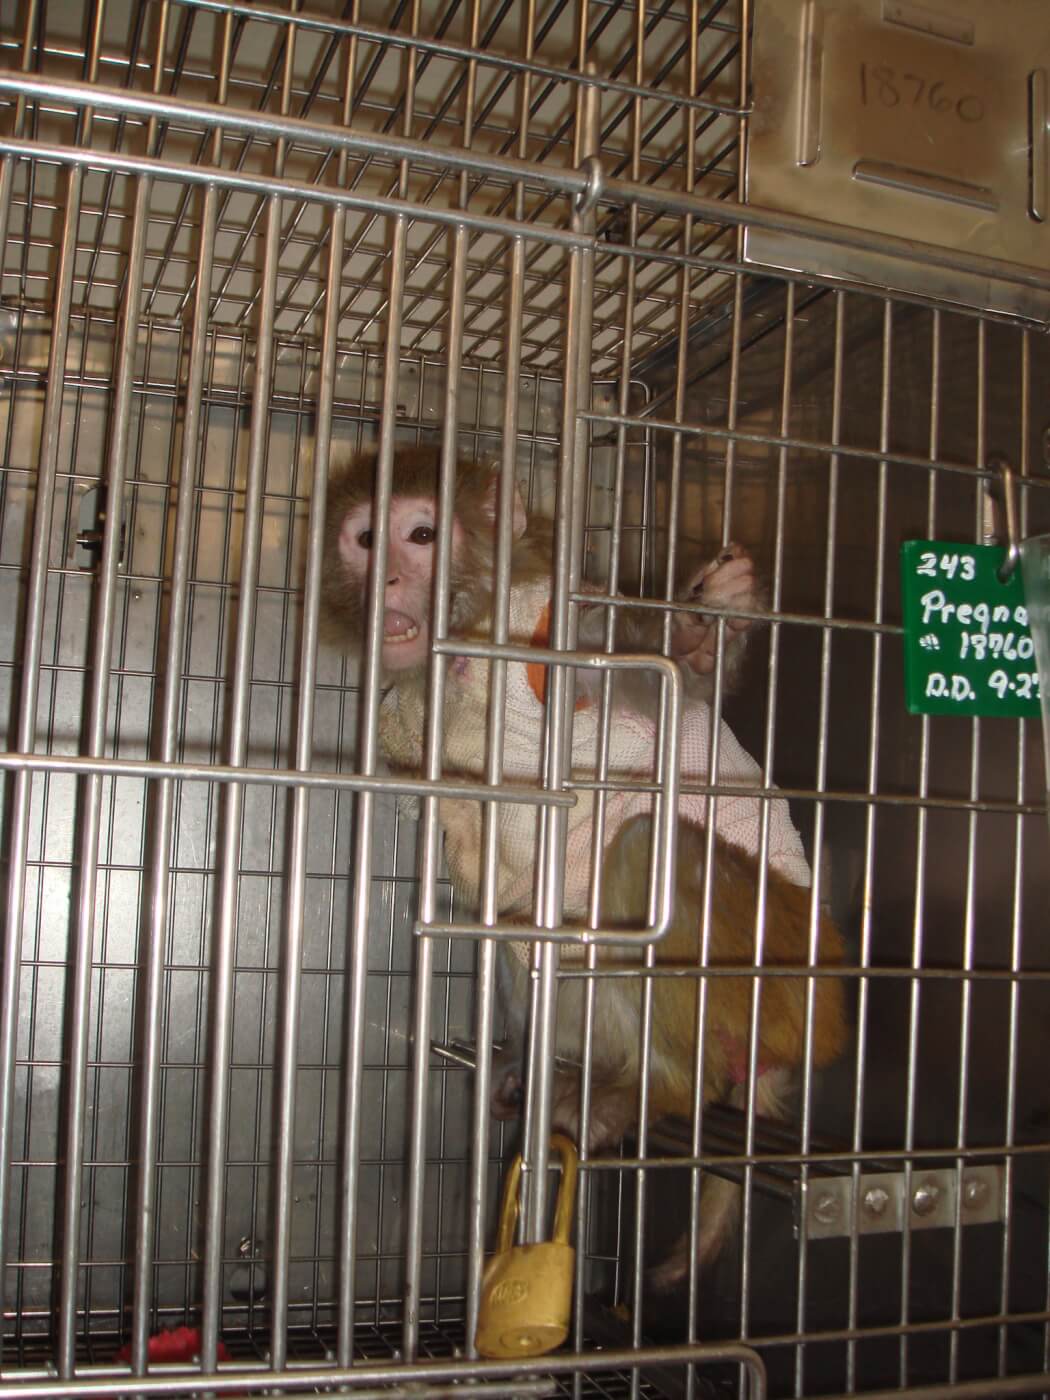 onprc 2008 peta investigation jacket Violations of the Federal Animal Welfare Act in the Laboratories of Oregon Health & Science University